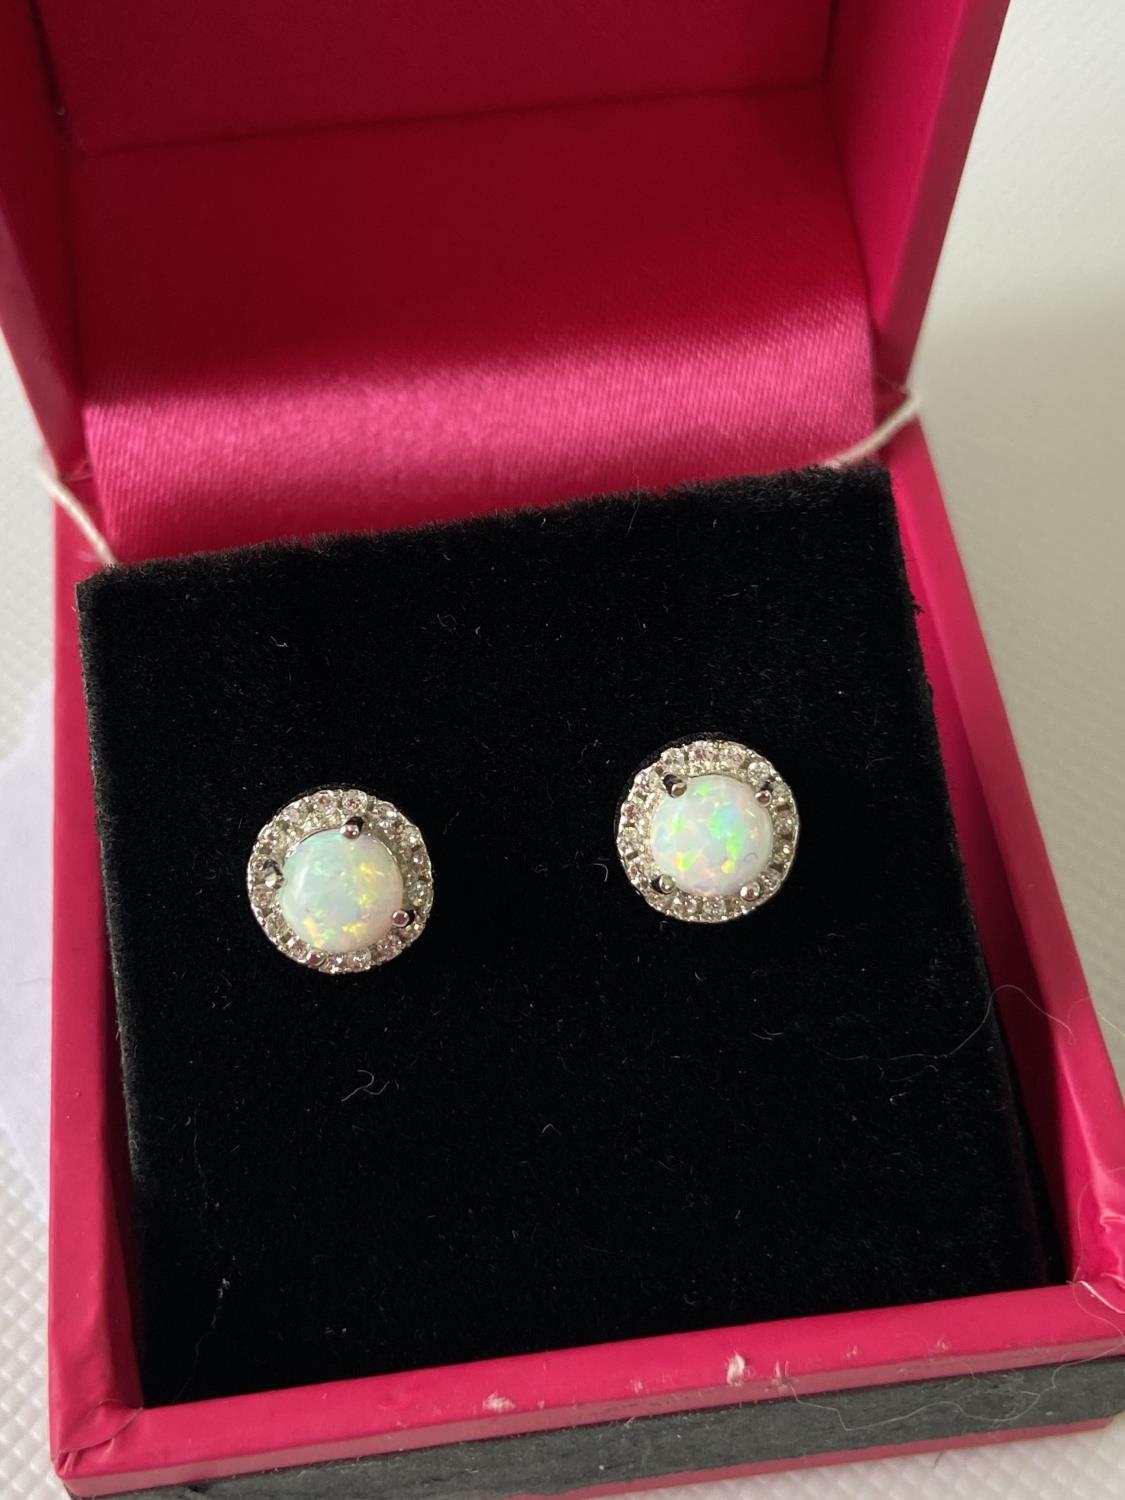 A Pair of silver CZ and Opal stud earrings. - Image 5 of 6